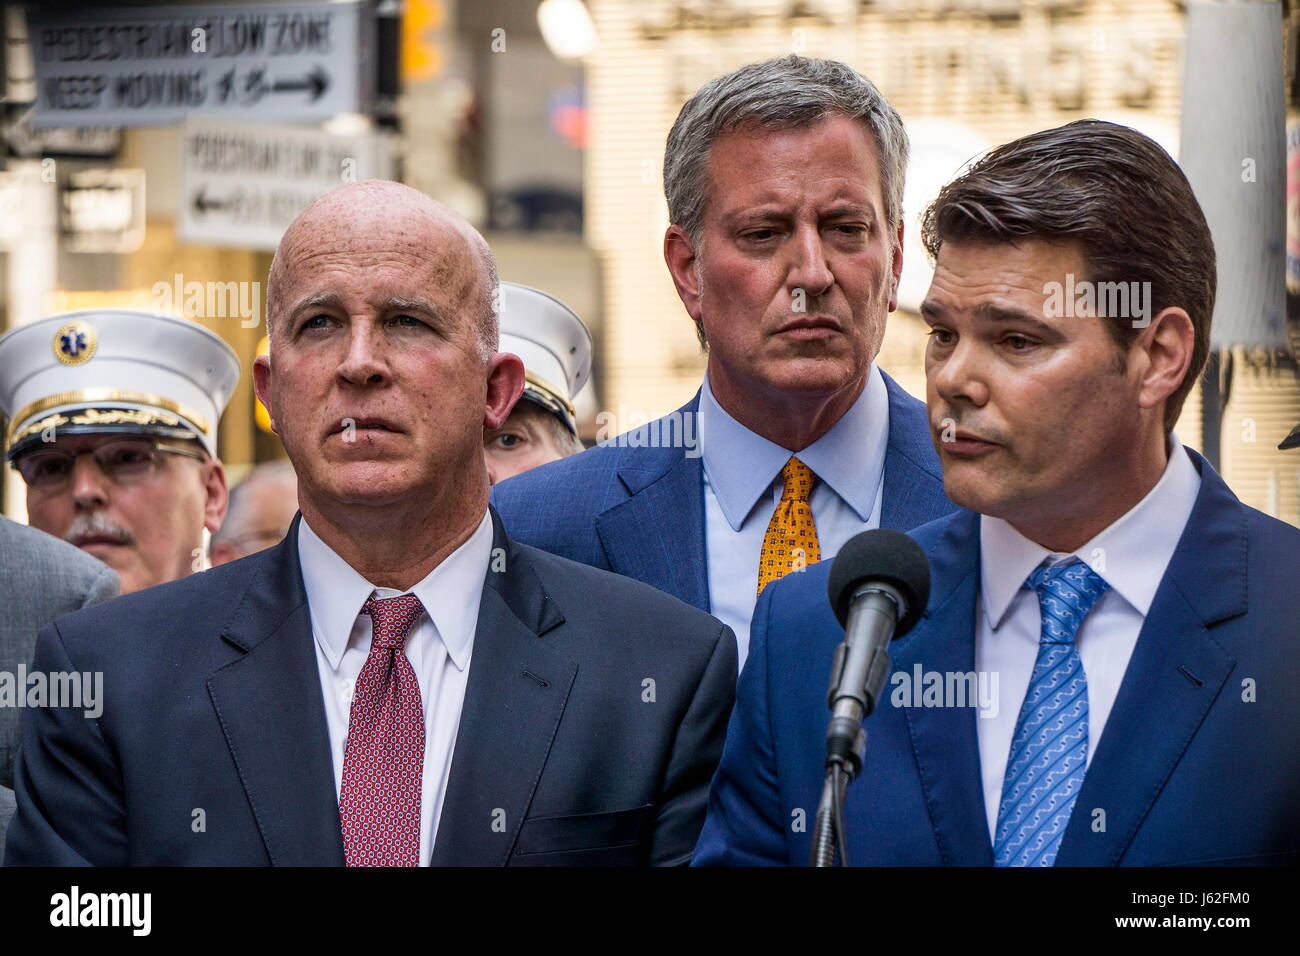 New York, New York, USA. 18th May, 2017. New York City Mayor Bill DeBlasio (C), New York Police Commissioner James O'Neil (L) and other public officials gather in Times Square after one pedestrian was killed, from Michigan, and 22 others were struck by a vehicle in Times Square. Credit: Kevin C. Downs/ZUMA Wire/ZUMAPRESS.com/Alamy Live News Stock Photo